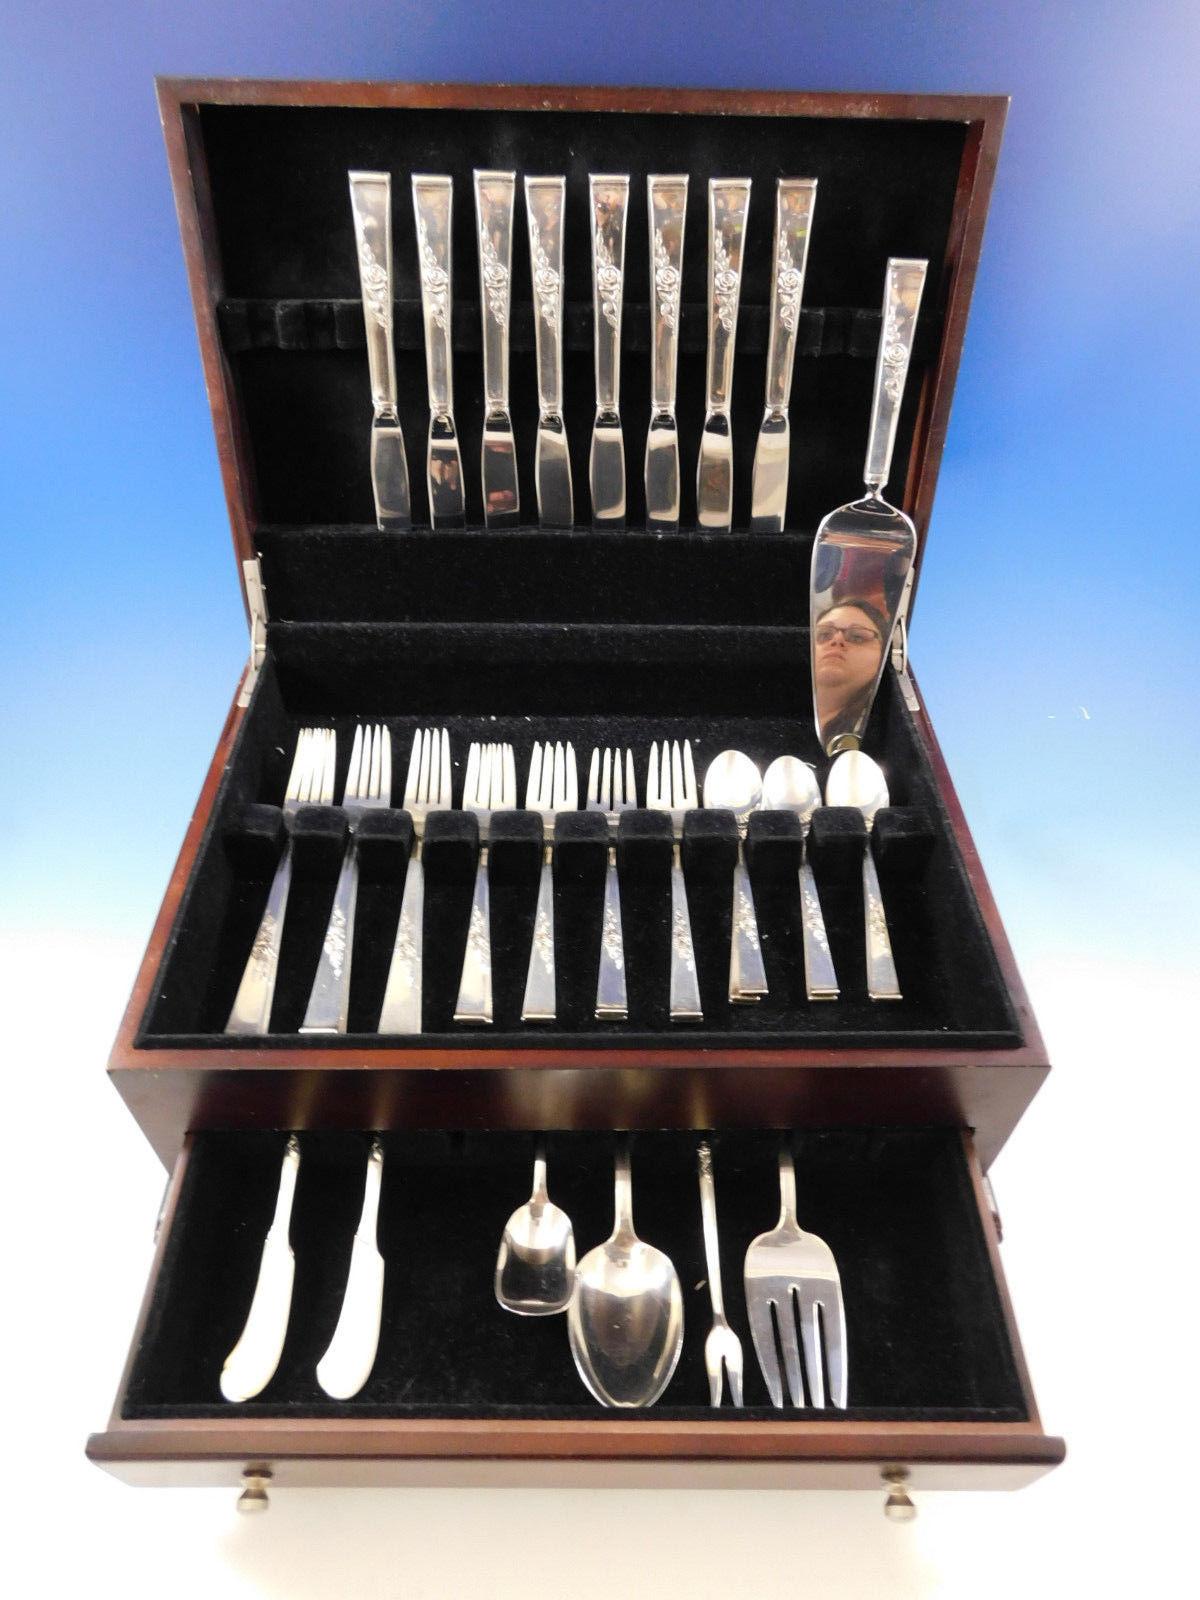 Classic Rose by Reed & Barton sterling silver Flatware set - 45 Pieces. This set includes:

8 knives, 9